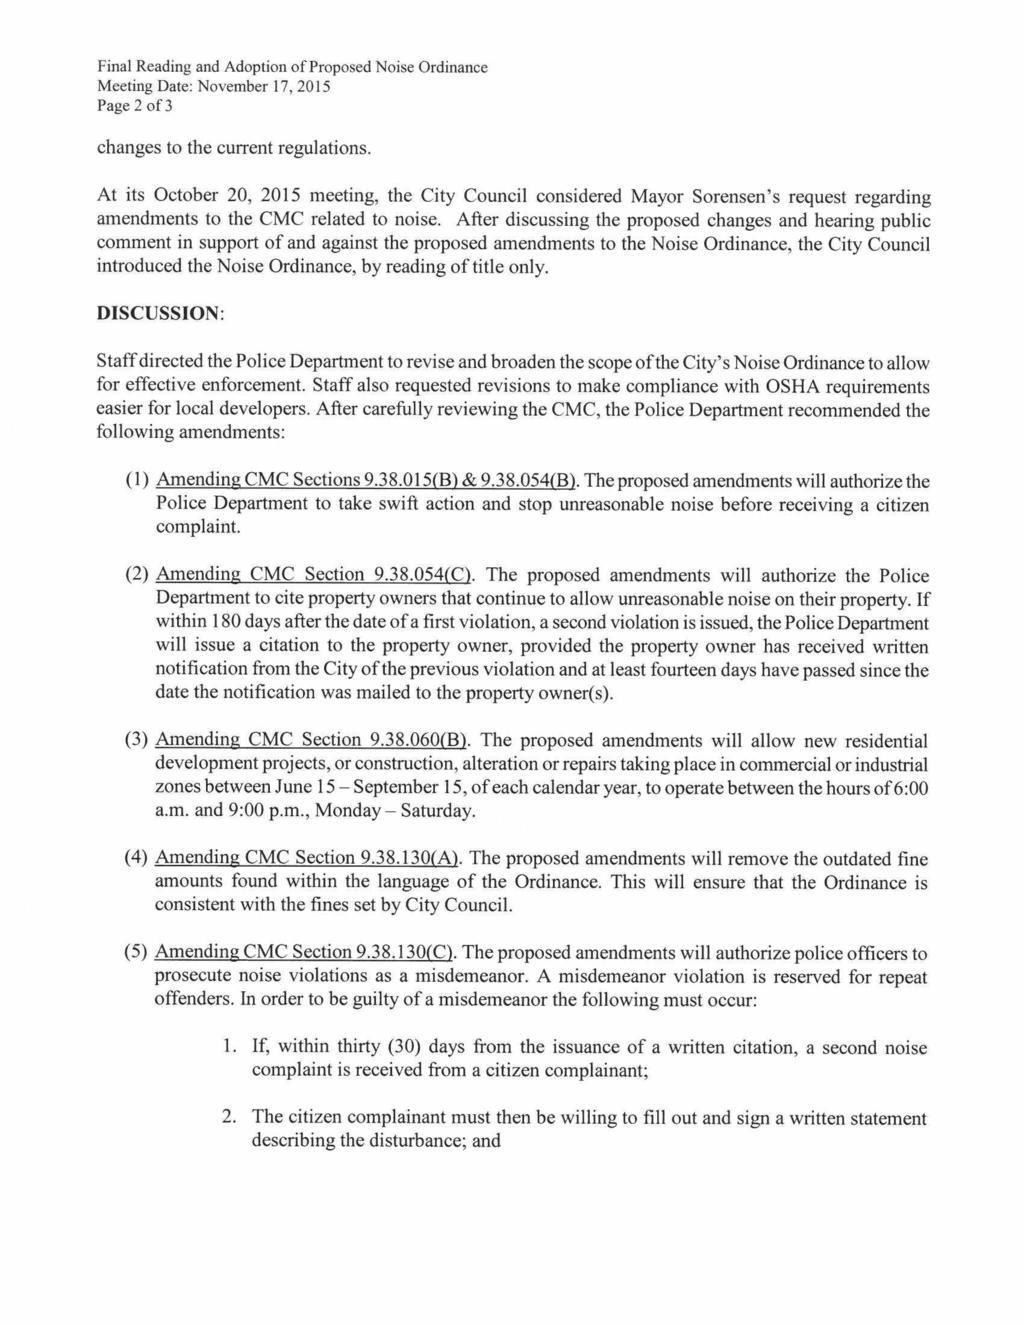 Final Reading and Adoption of Proposed Noise Ordinance Meeting Date: November 1,0 Page of changes to the current regulations.